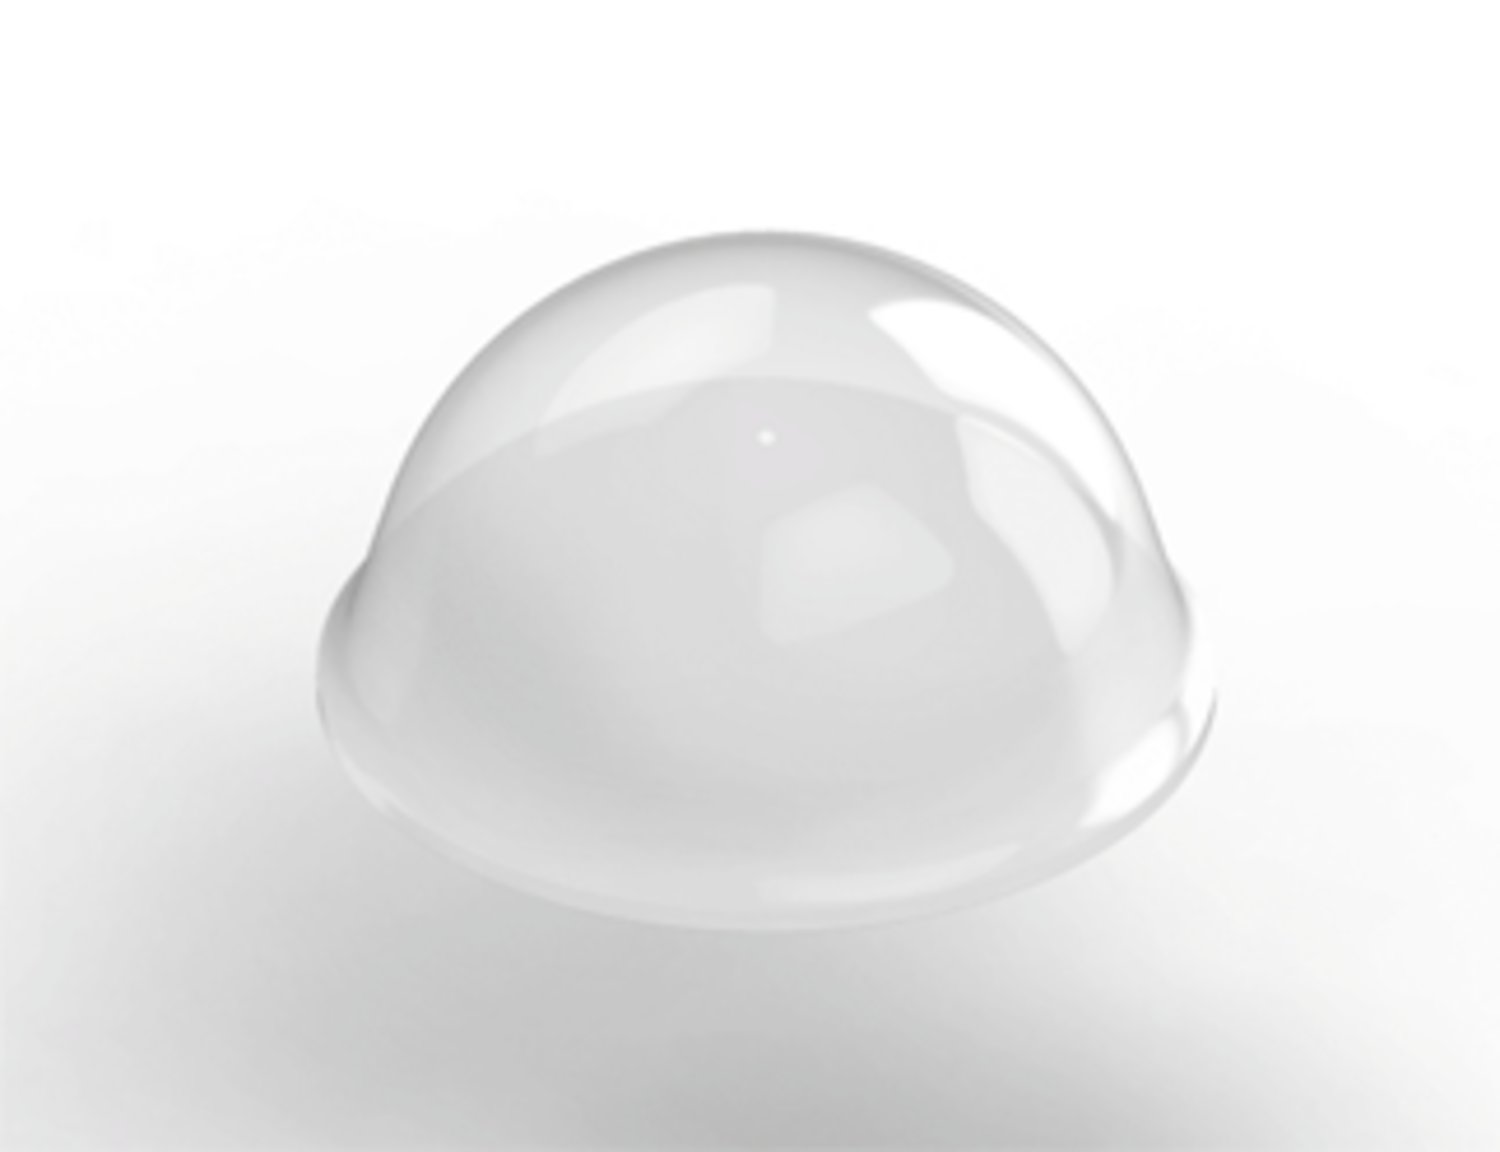 7100002892 - 3M Bumpon Protective Products SJ5327 Clear, 1000/Case